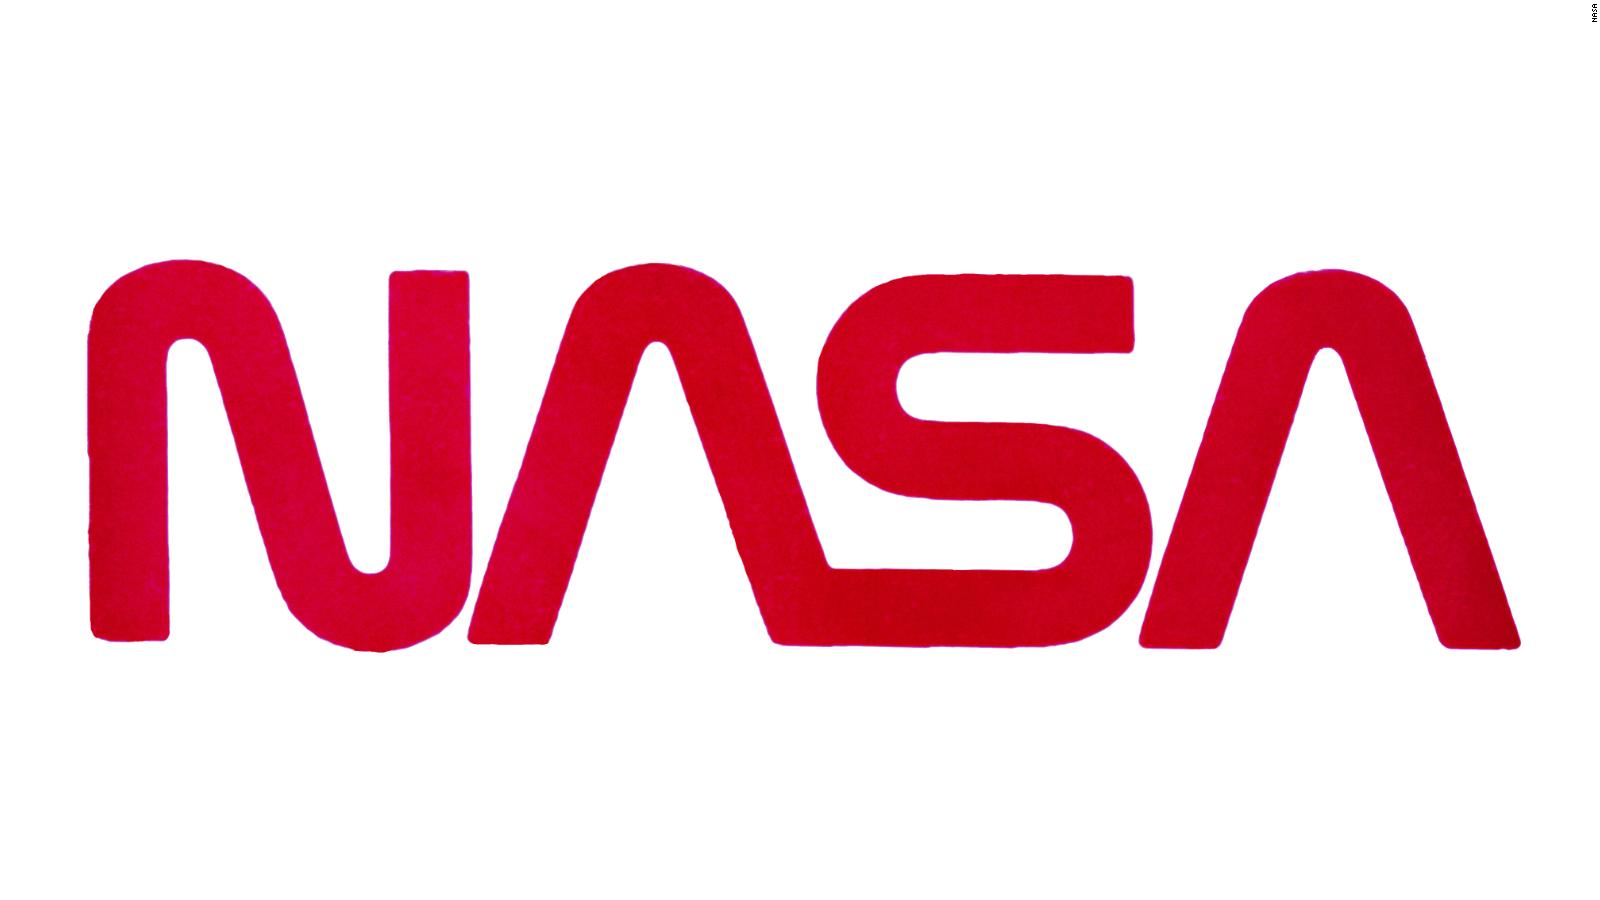 NASA's 'worm' logo is back. But why did it disappear? - CNN Style